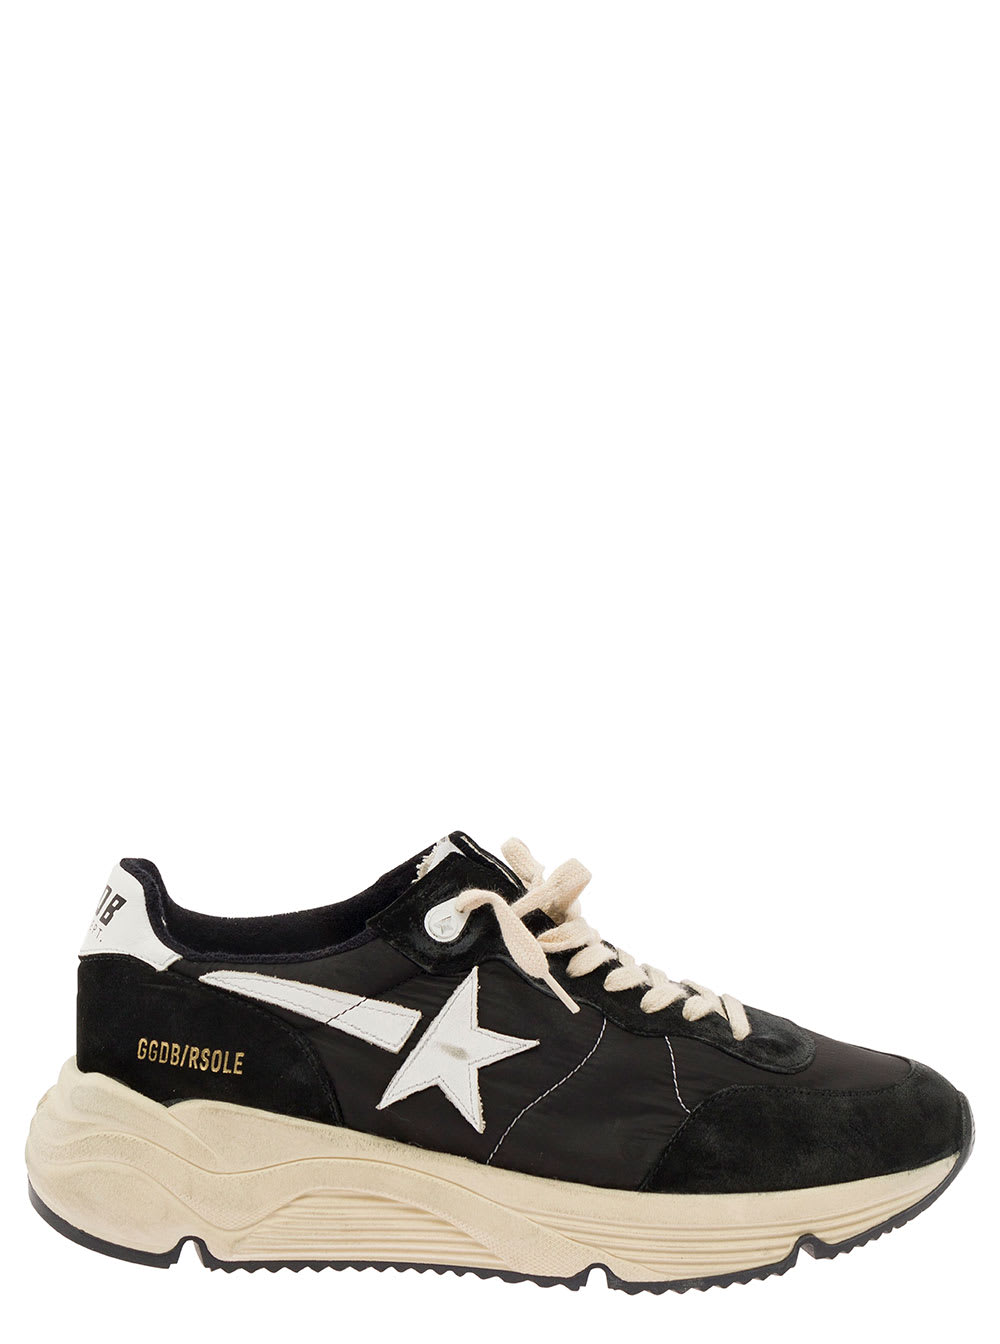 GOLDEN GOOSE RUNNING BLACK LOW TOP SNEAKERS WITH STAR PATCH IN SUEDE AND TECH FABRIC MAN